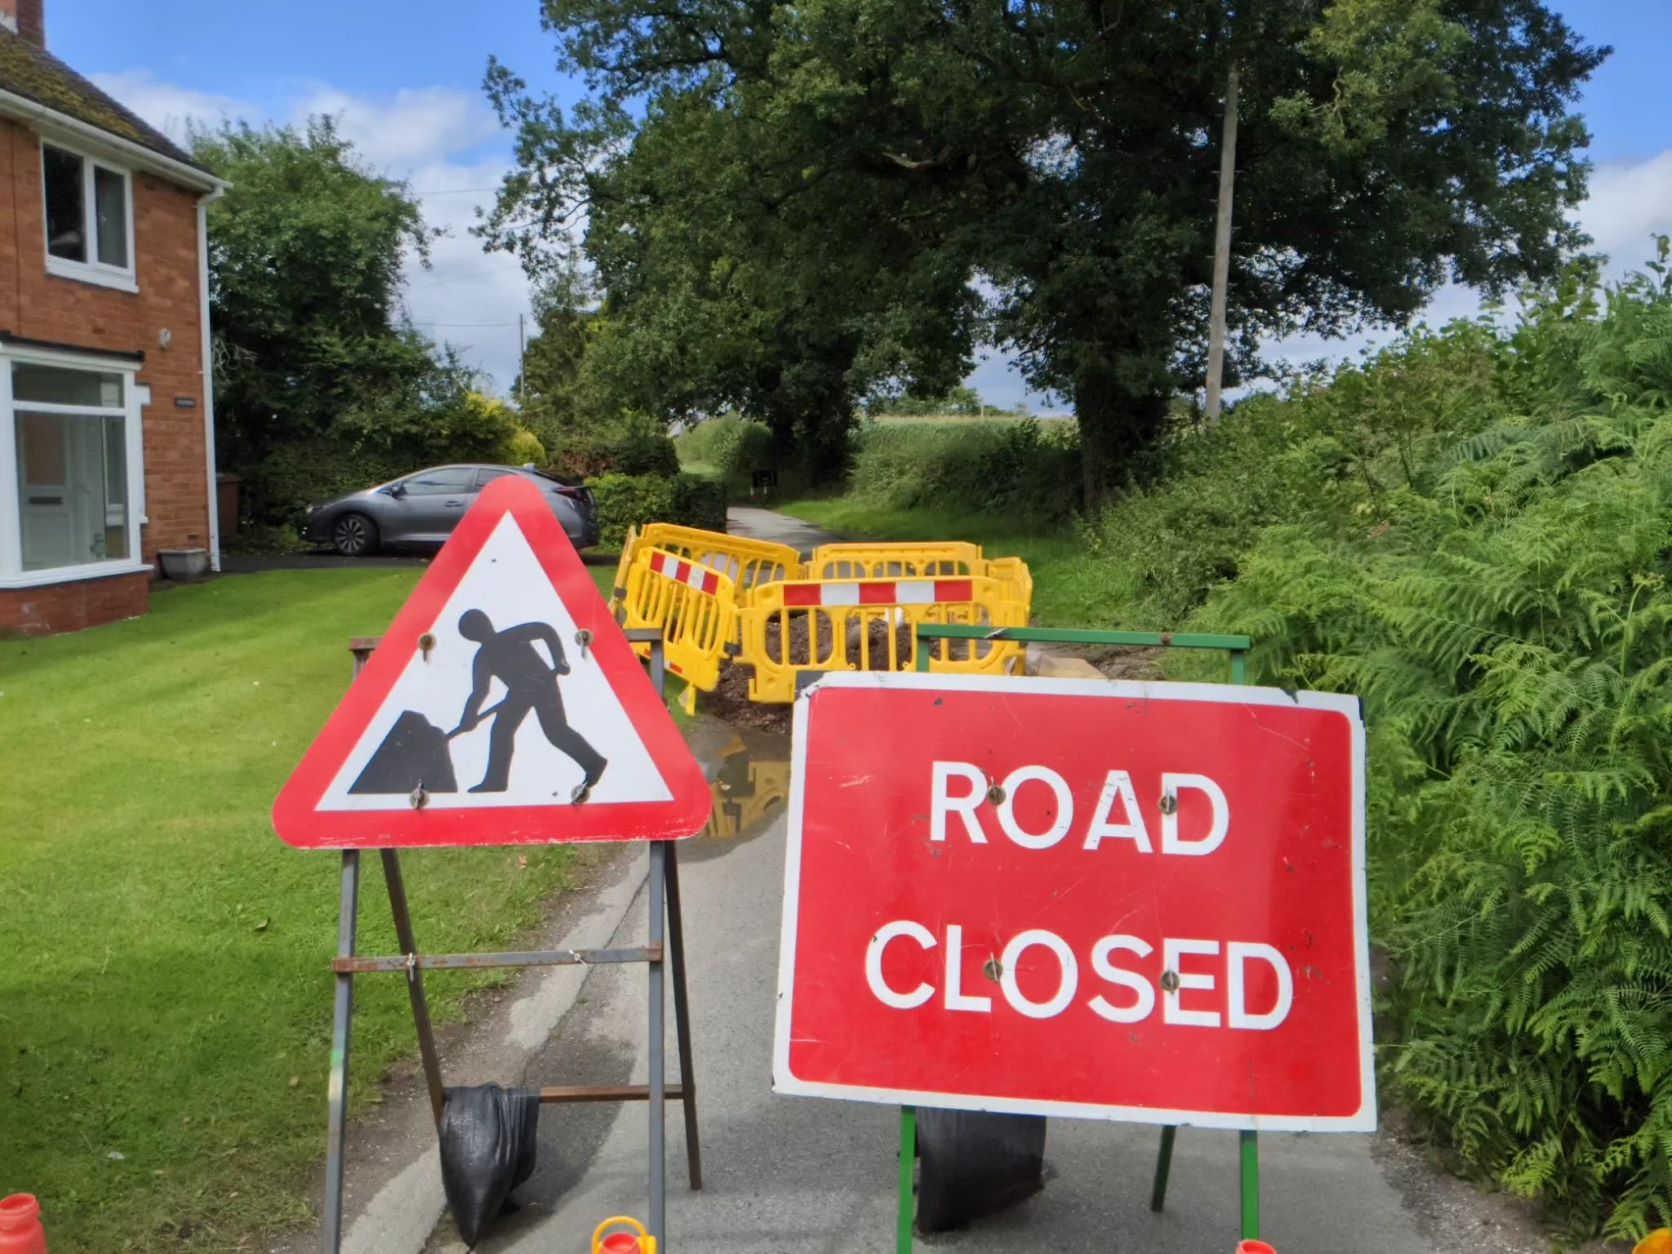 Road works in Monks Lane, August 6th